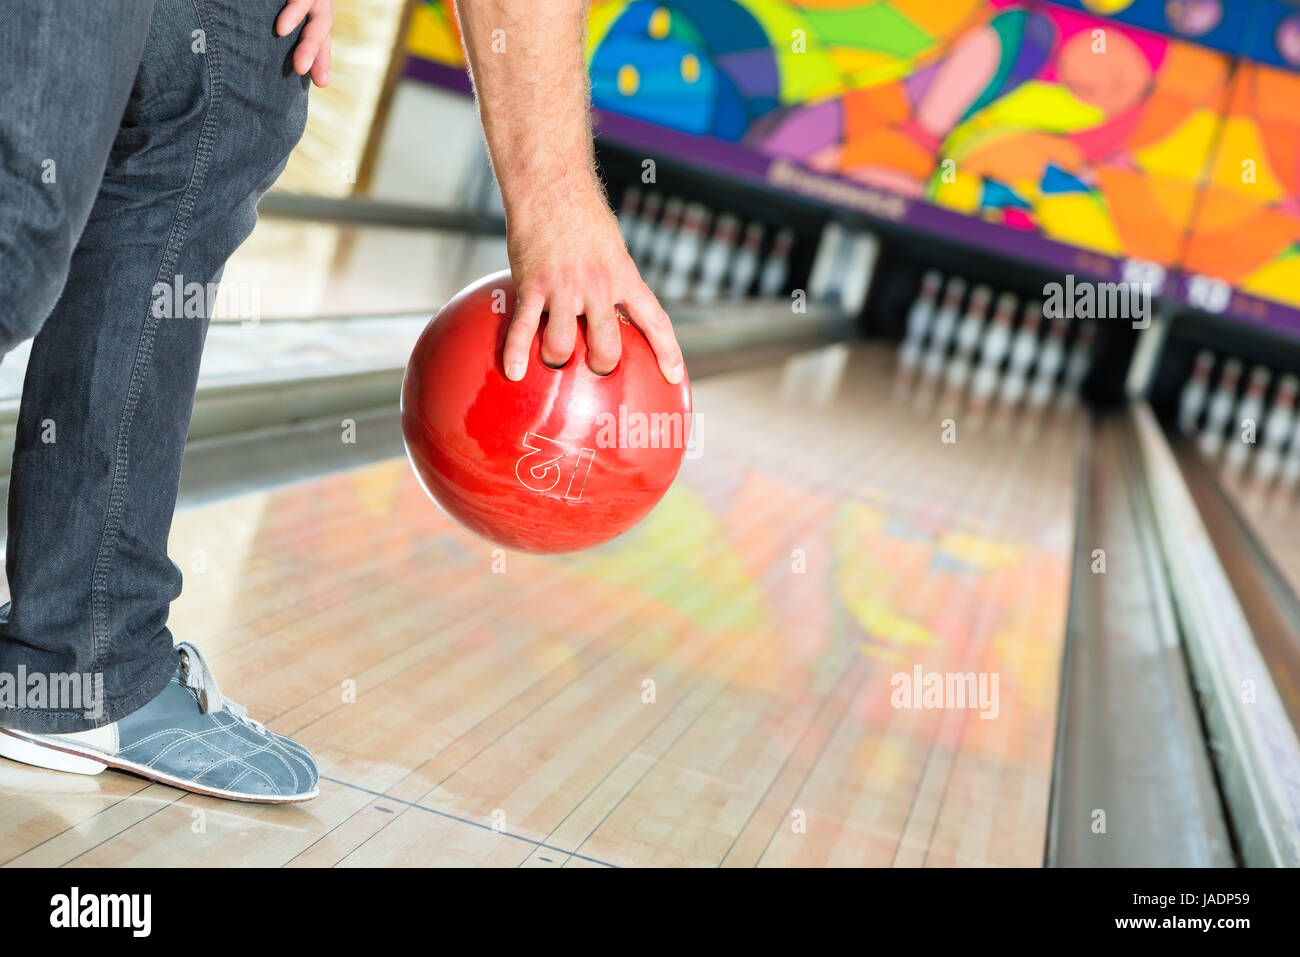 Young man in bowling alley having fun, the sporty man holding a bowling ball in front of the ten pin alley Stock Photo